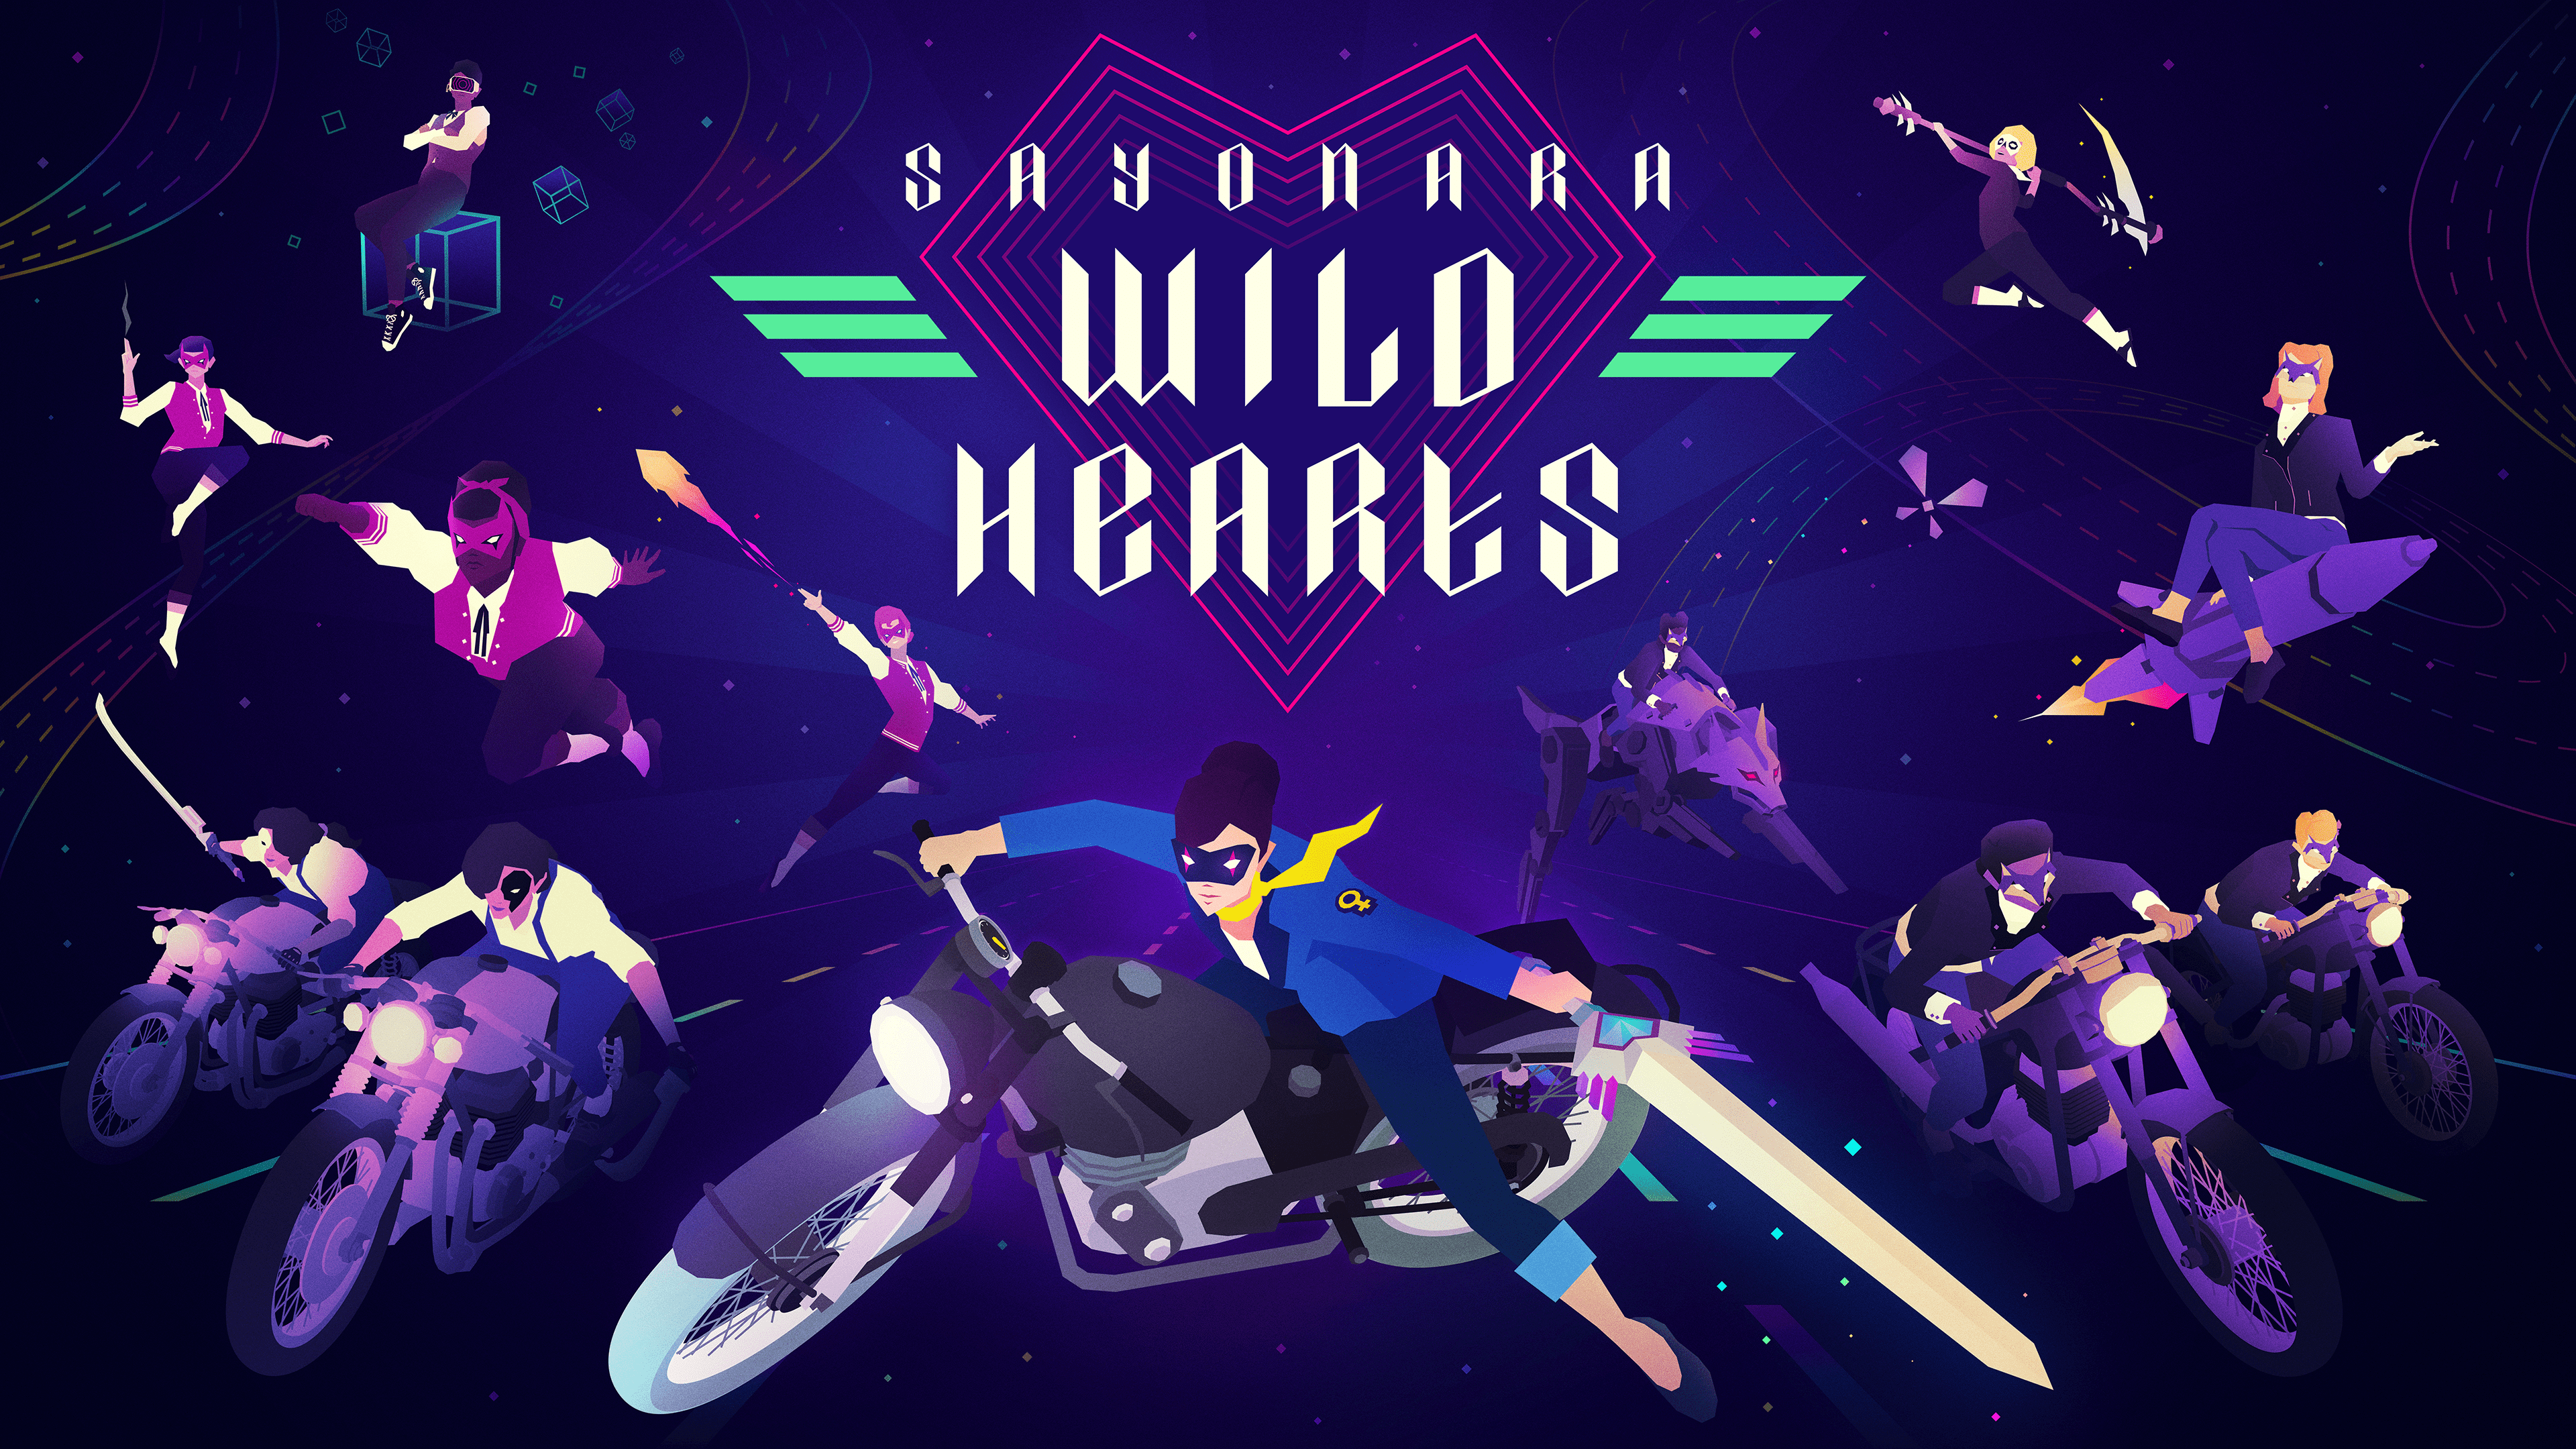 Sayonara Wild Hearts Is Speeding Its Way Into The Gaming World With A Unique Journey Revolving Around A Pop Soundtrack